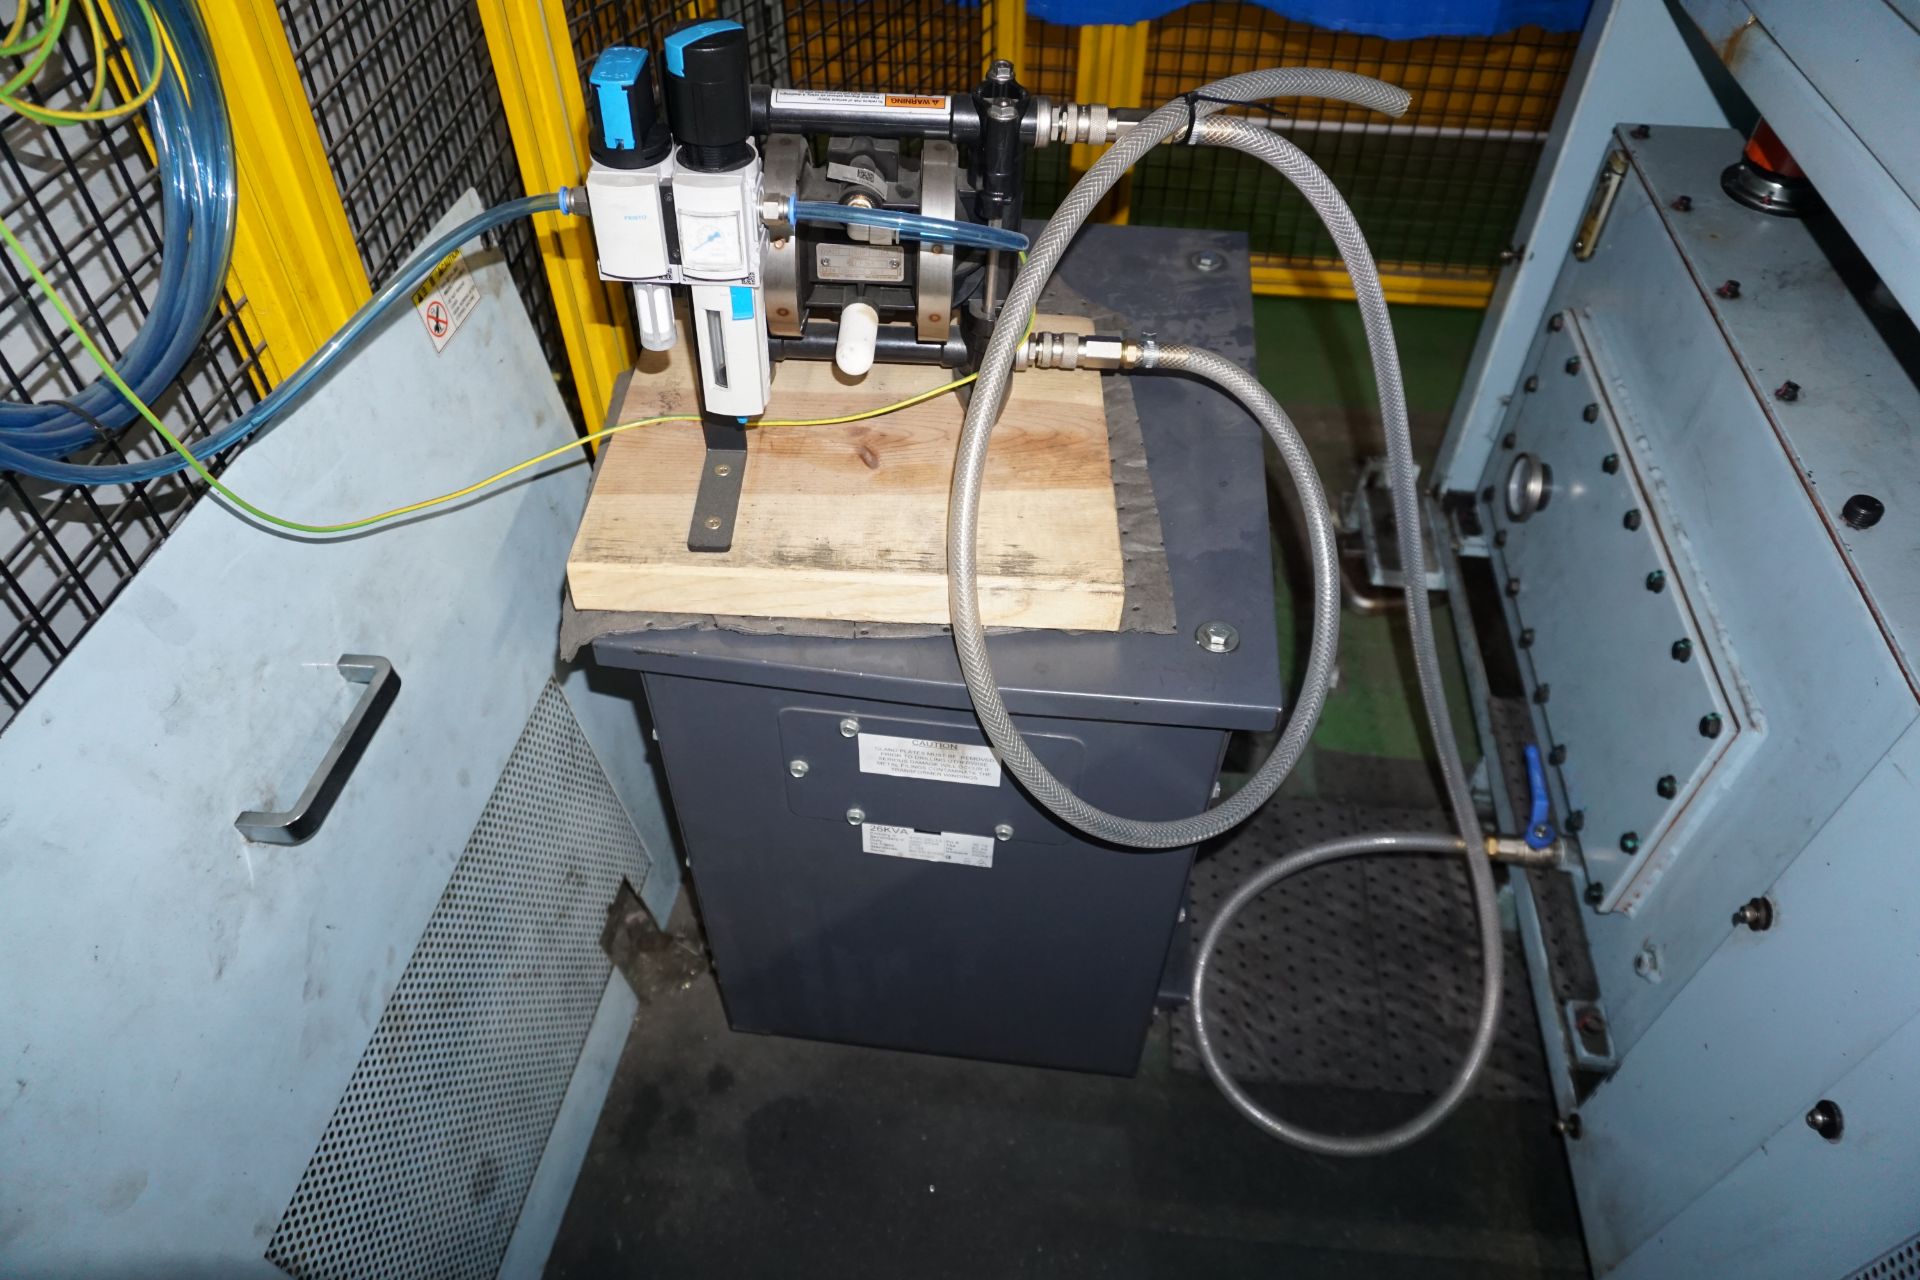 Keiyo automated tube bending/pressing system with a Yaskawa Motorman HP20D high precision robot - Image 20 of 46